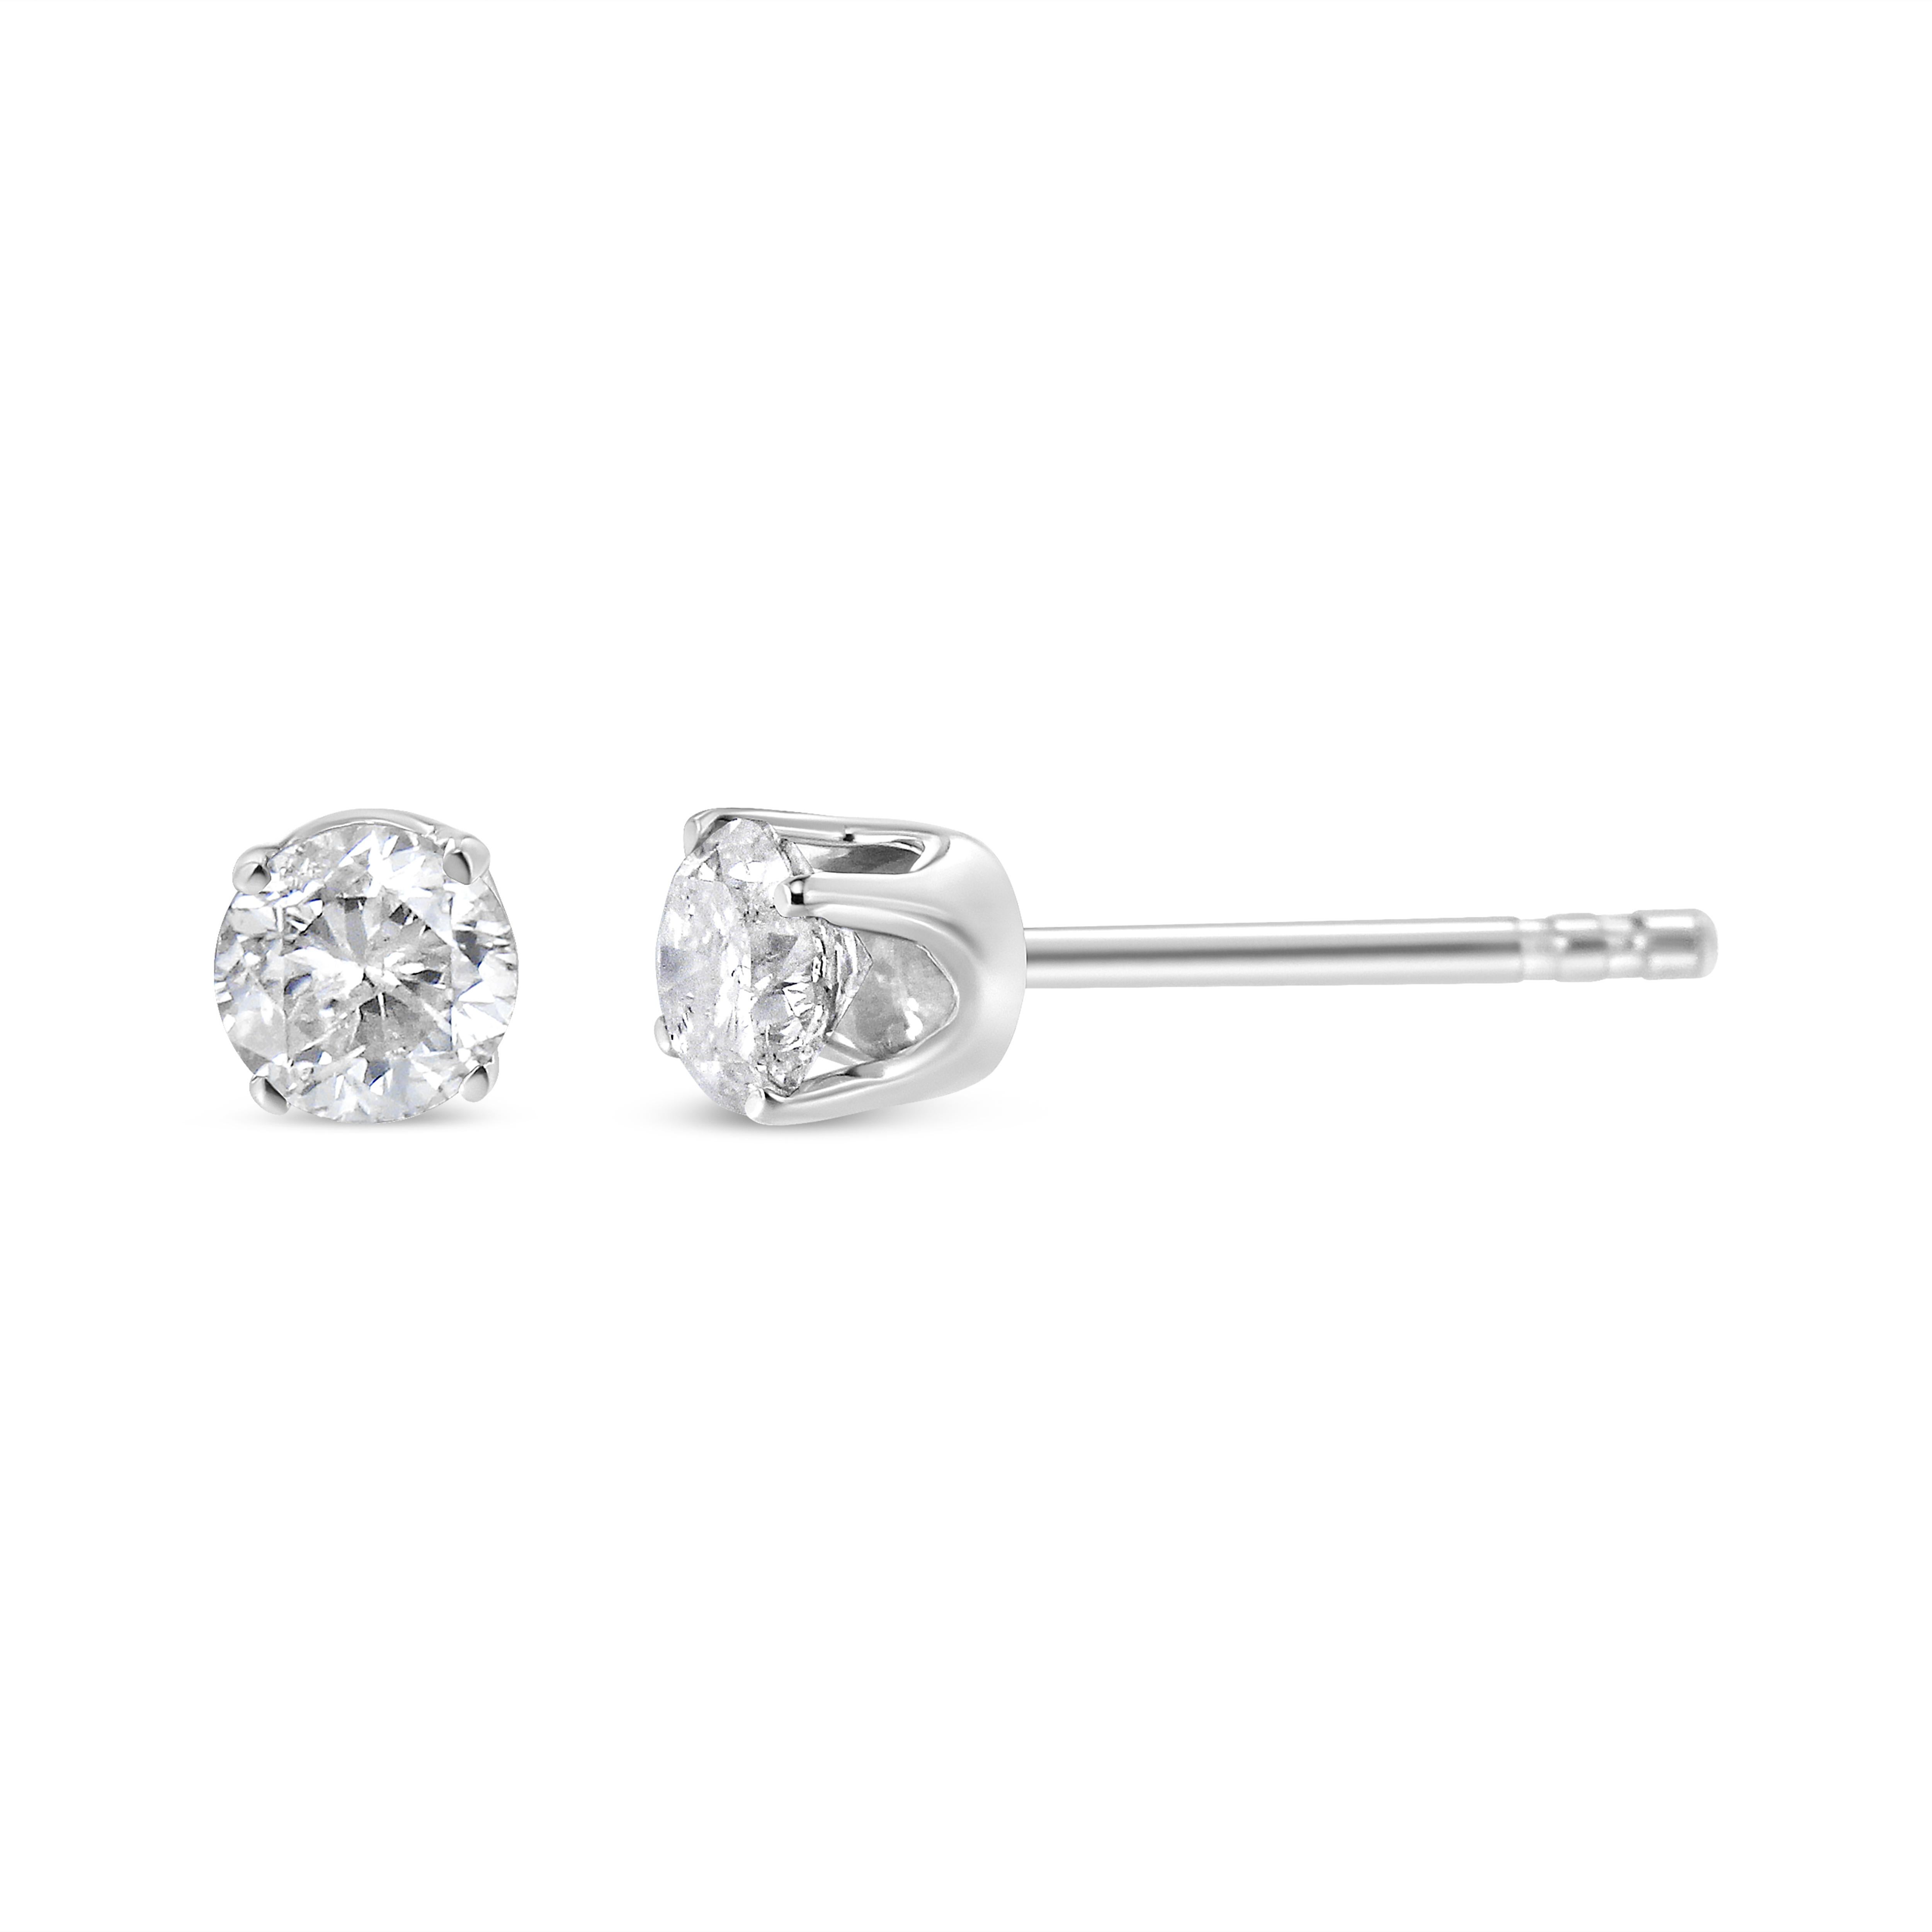 Elevate your style with these exquisite Classic Round Brilliant Cut Natural Diamond Stud Earrings. Crafted with precision and sophistication, these earrings are designed to enhance your everyday elegance. Each stud features a pair of matching round